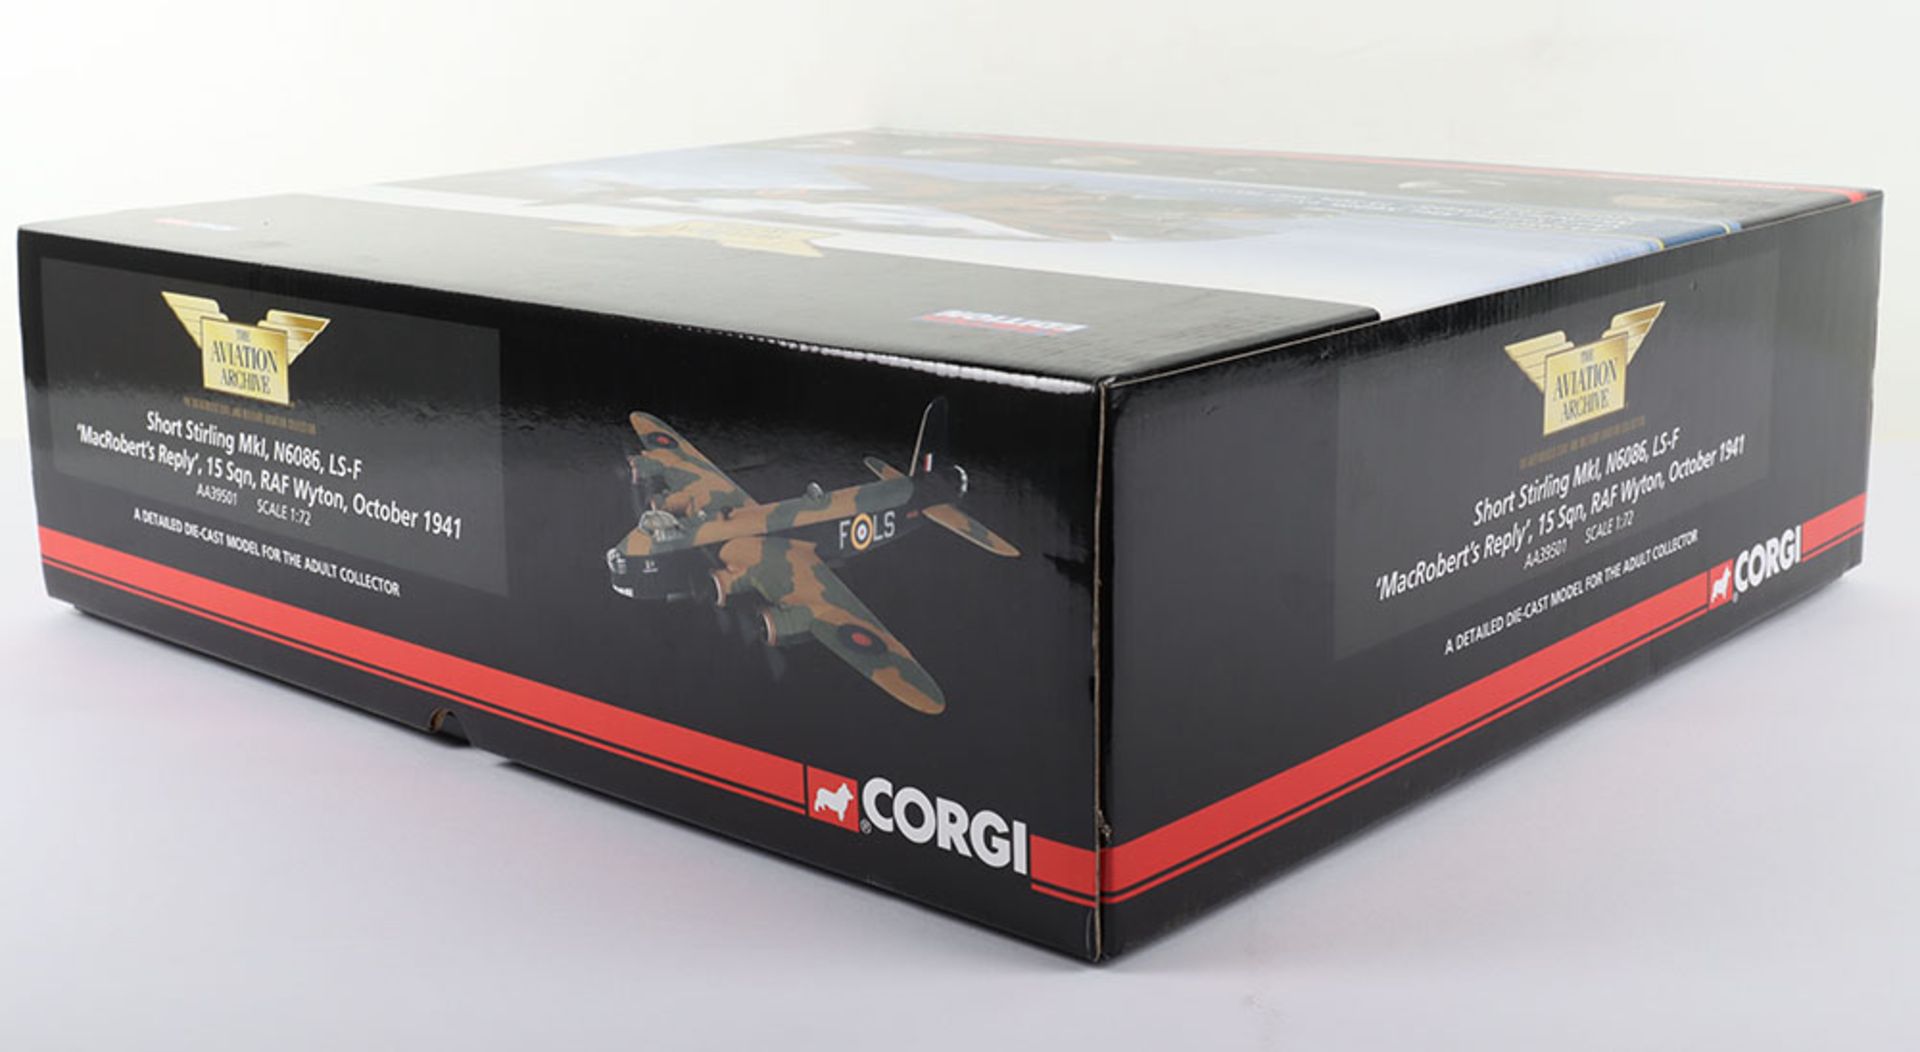 Corgi “The Aviation Archive” AA39501 Short Stirling MK1 Low numbered model - Image 3 of 6